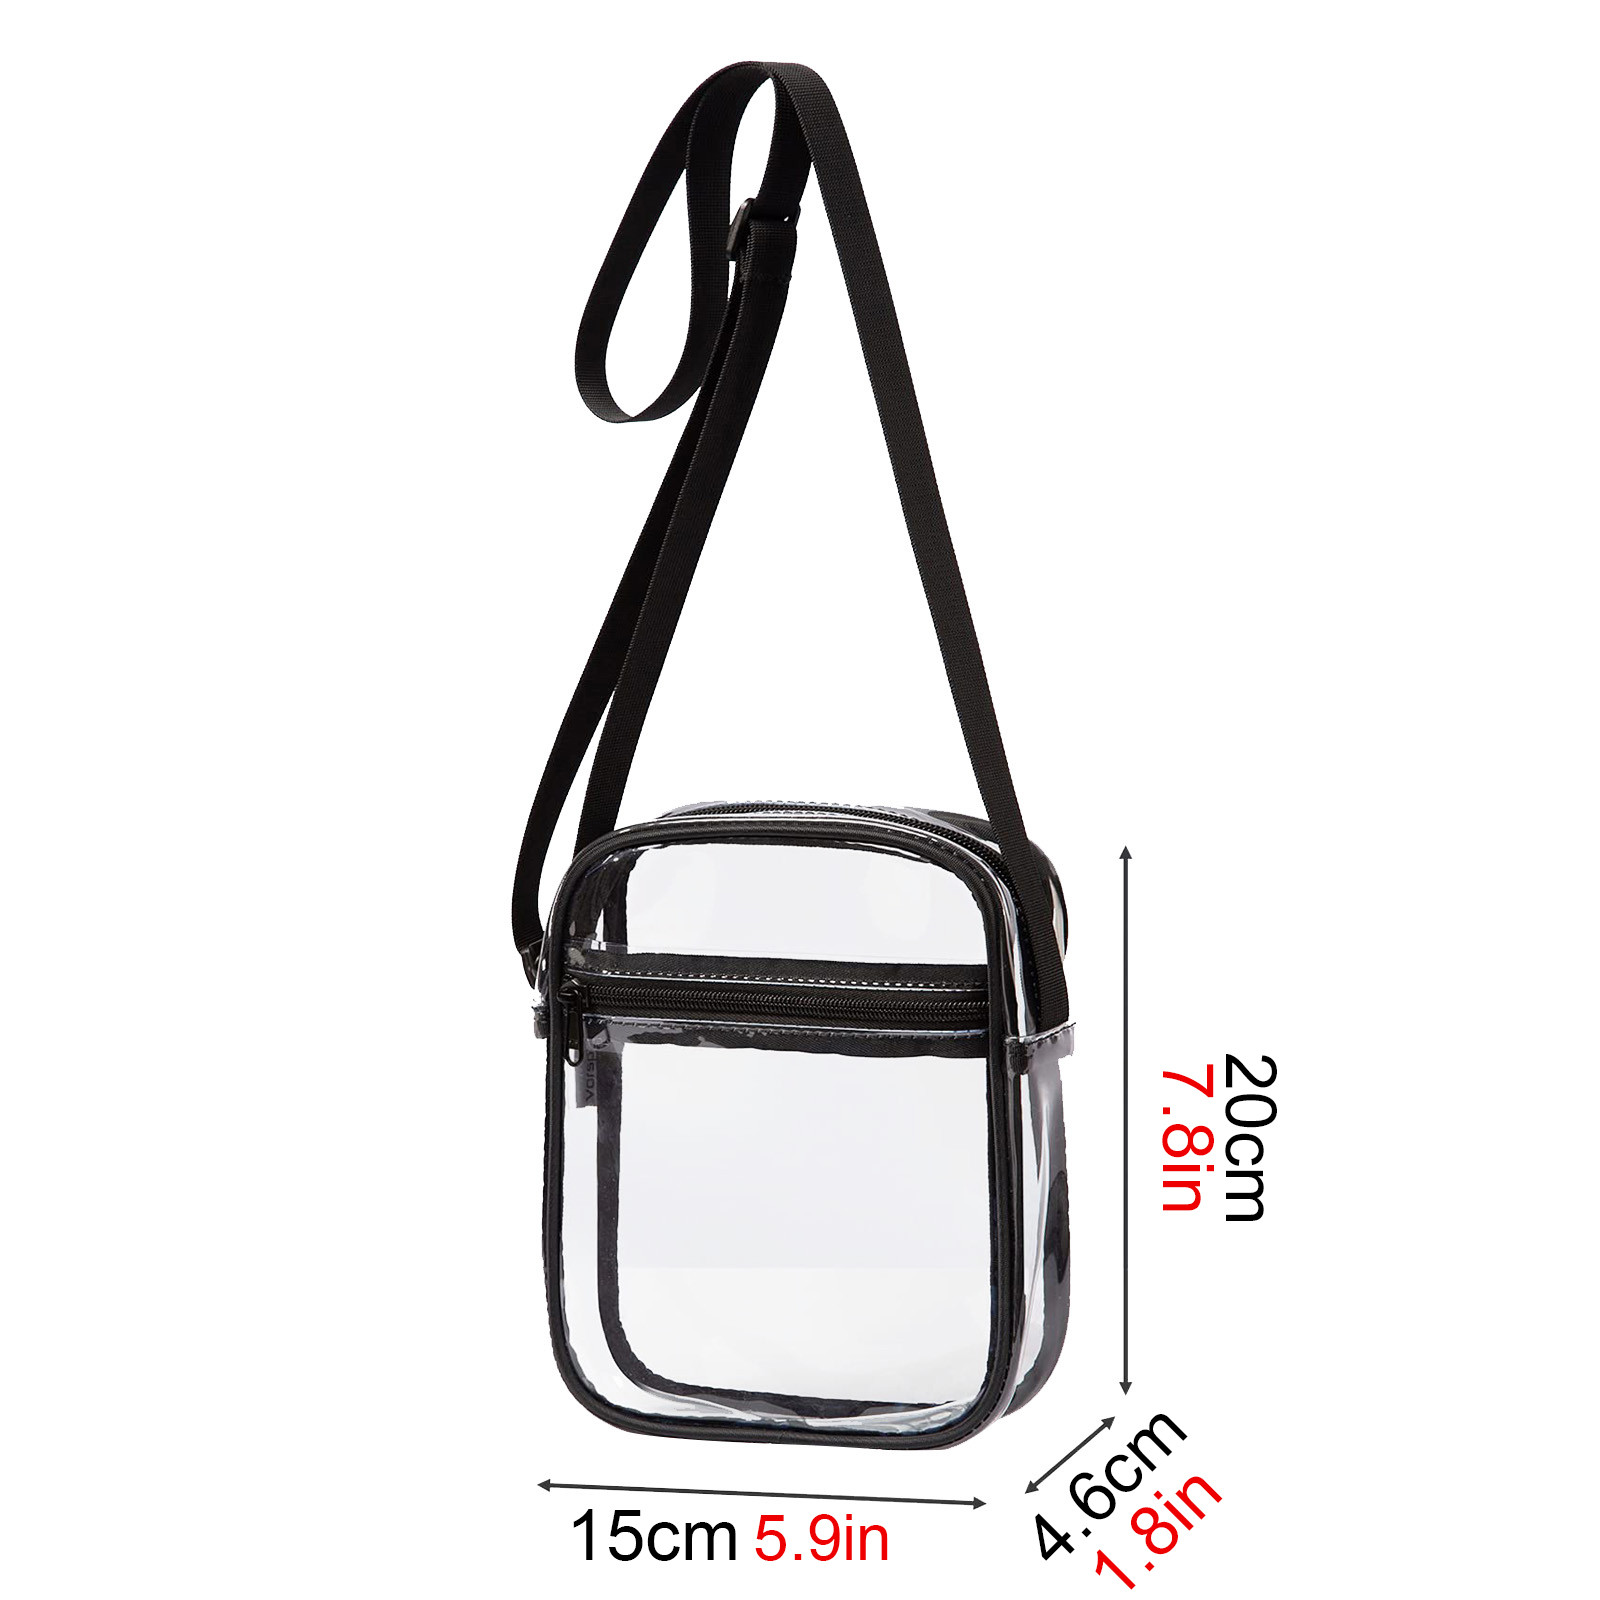 Foraging dimple Clear Bag Stadium Approved Purse Transparent Crossbody Bags for Women & Men PVC Messenger Handbag for Concert Sports Events - image 1 of 2